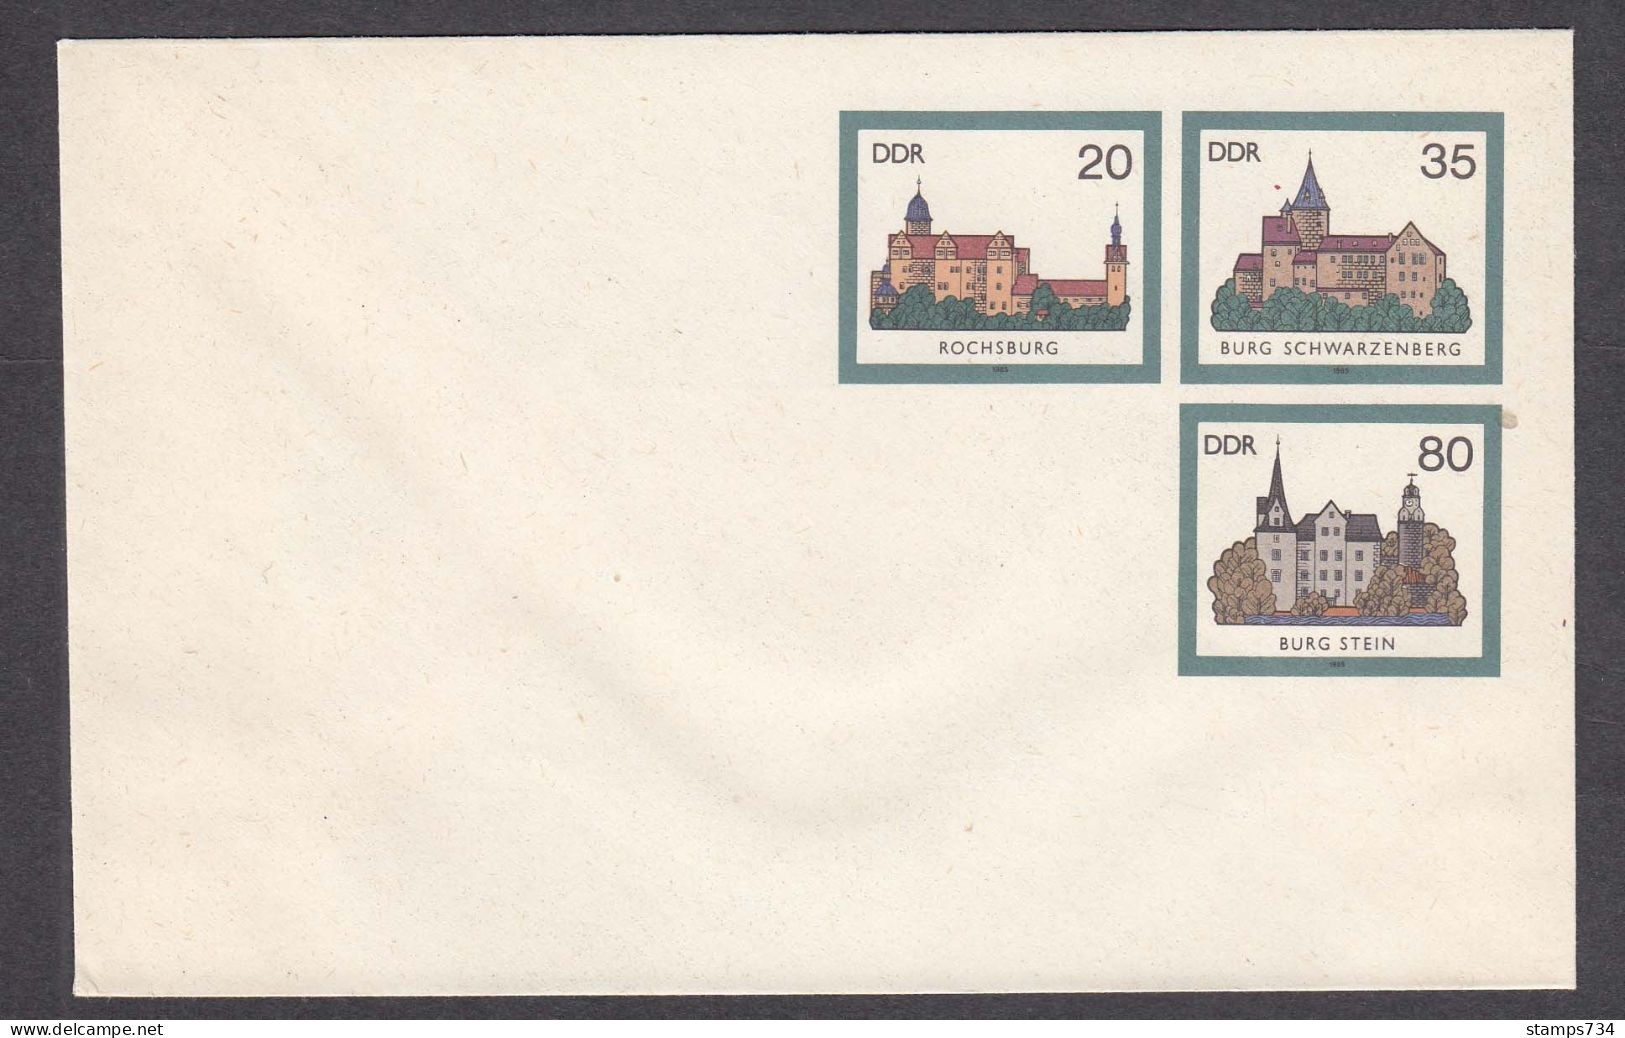 DDR 09/1985 - Castles, Post. Stationery (cover), Mint - Buste - Nuovi